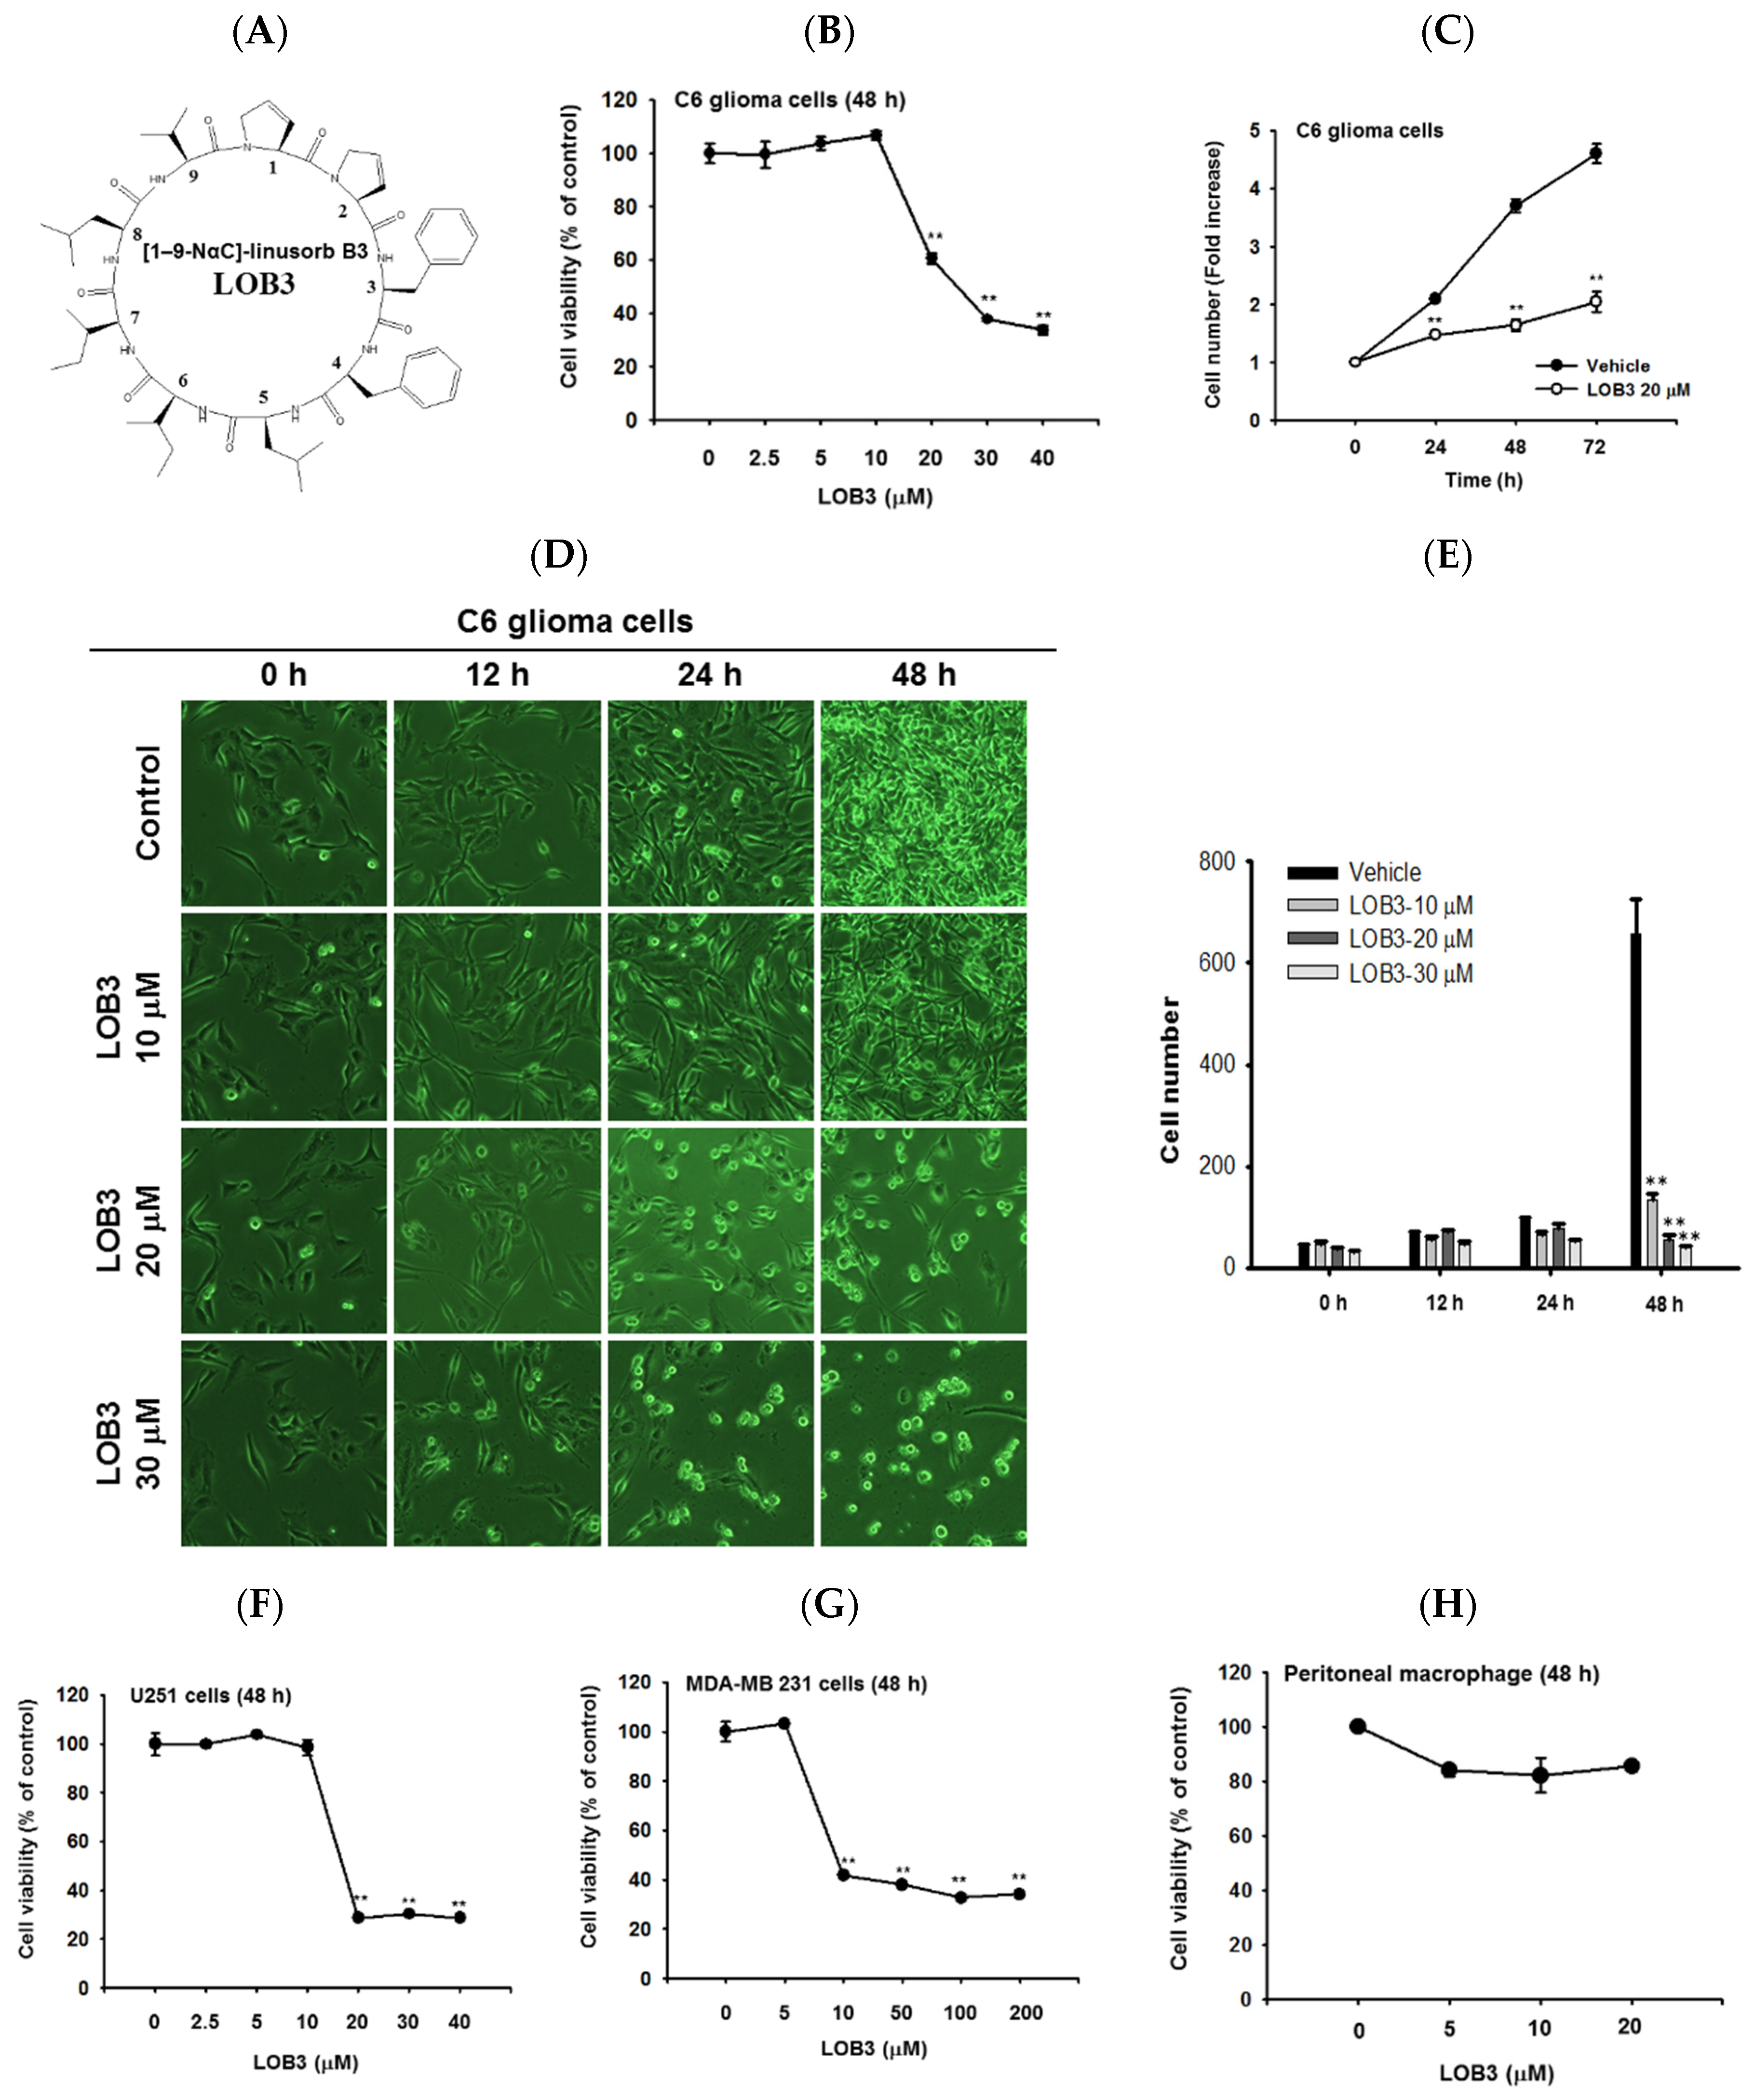 Molecules | Free Full-Text | The Anti-Cancer Effect of Linusorb B3 from  Flaxseed Oil through the Promotion of Apoptosis, Inhibition of Actin  Polymerization, and Suppression of Src Activity in Glioblastoma Cells